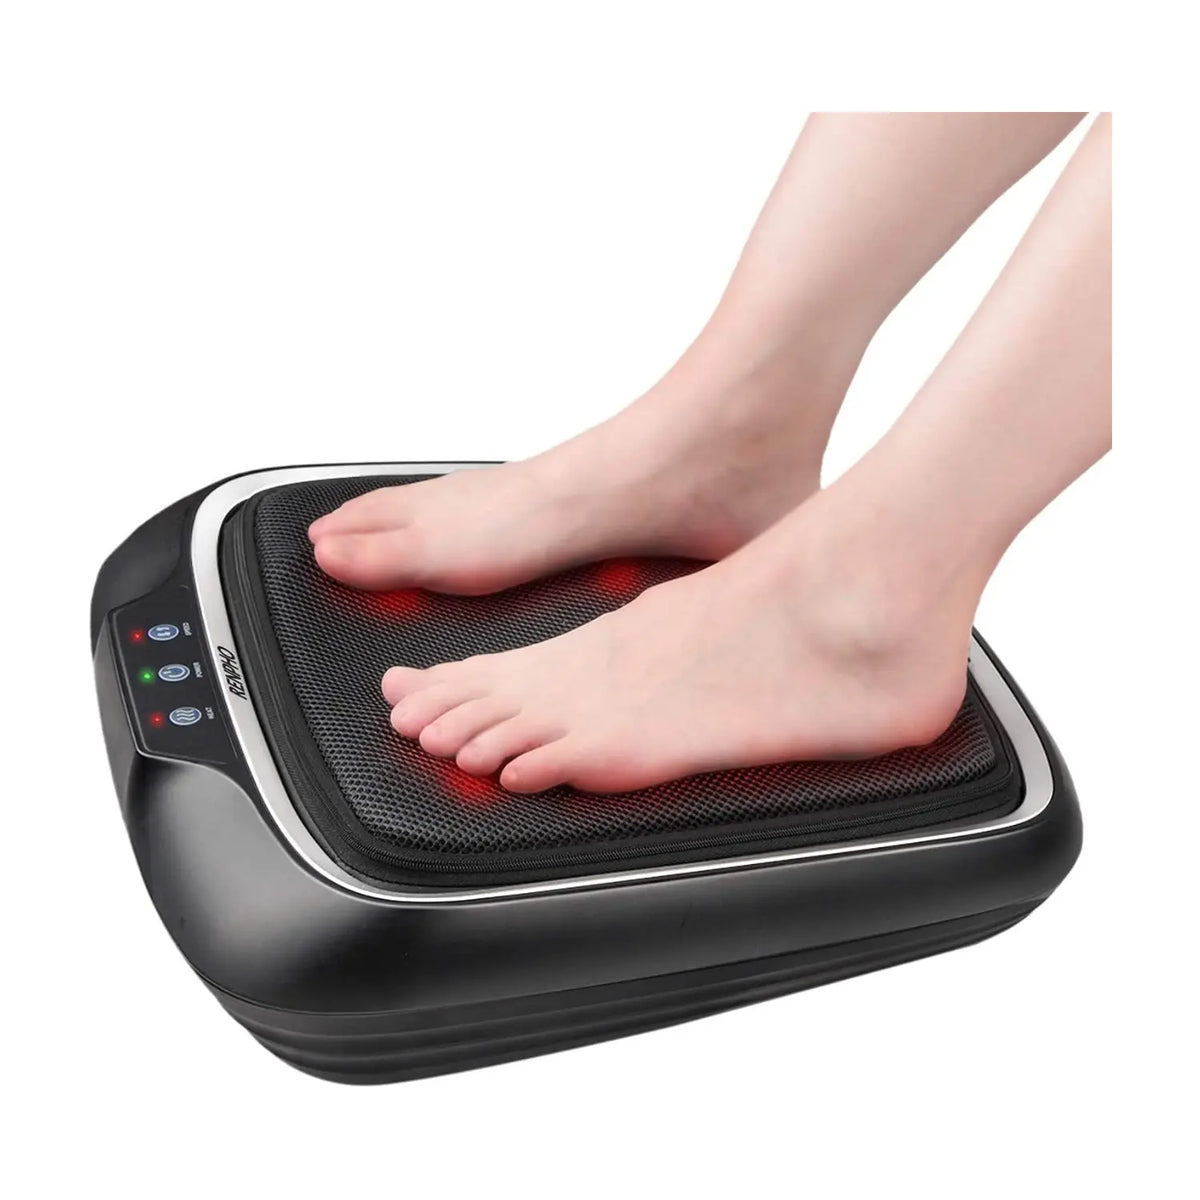 A pair of bare feet resting on a black Renpho EU Foot Massager Pad with buttons and control panel on the top edge. The device has a mesh surface and emits a red light around the feet area, indicating it's in use. The portable massager is placed against a plain white background, offering deep kneading massage.